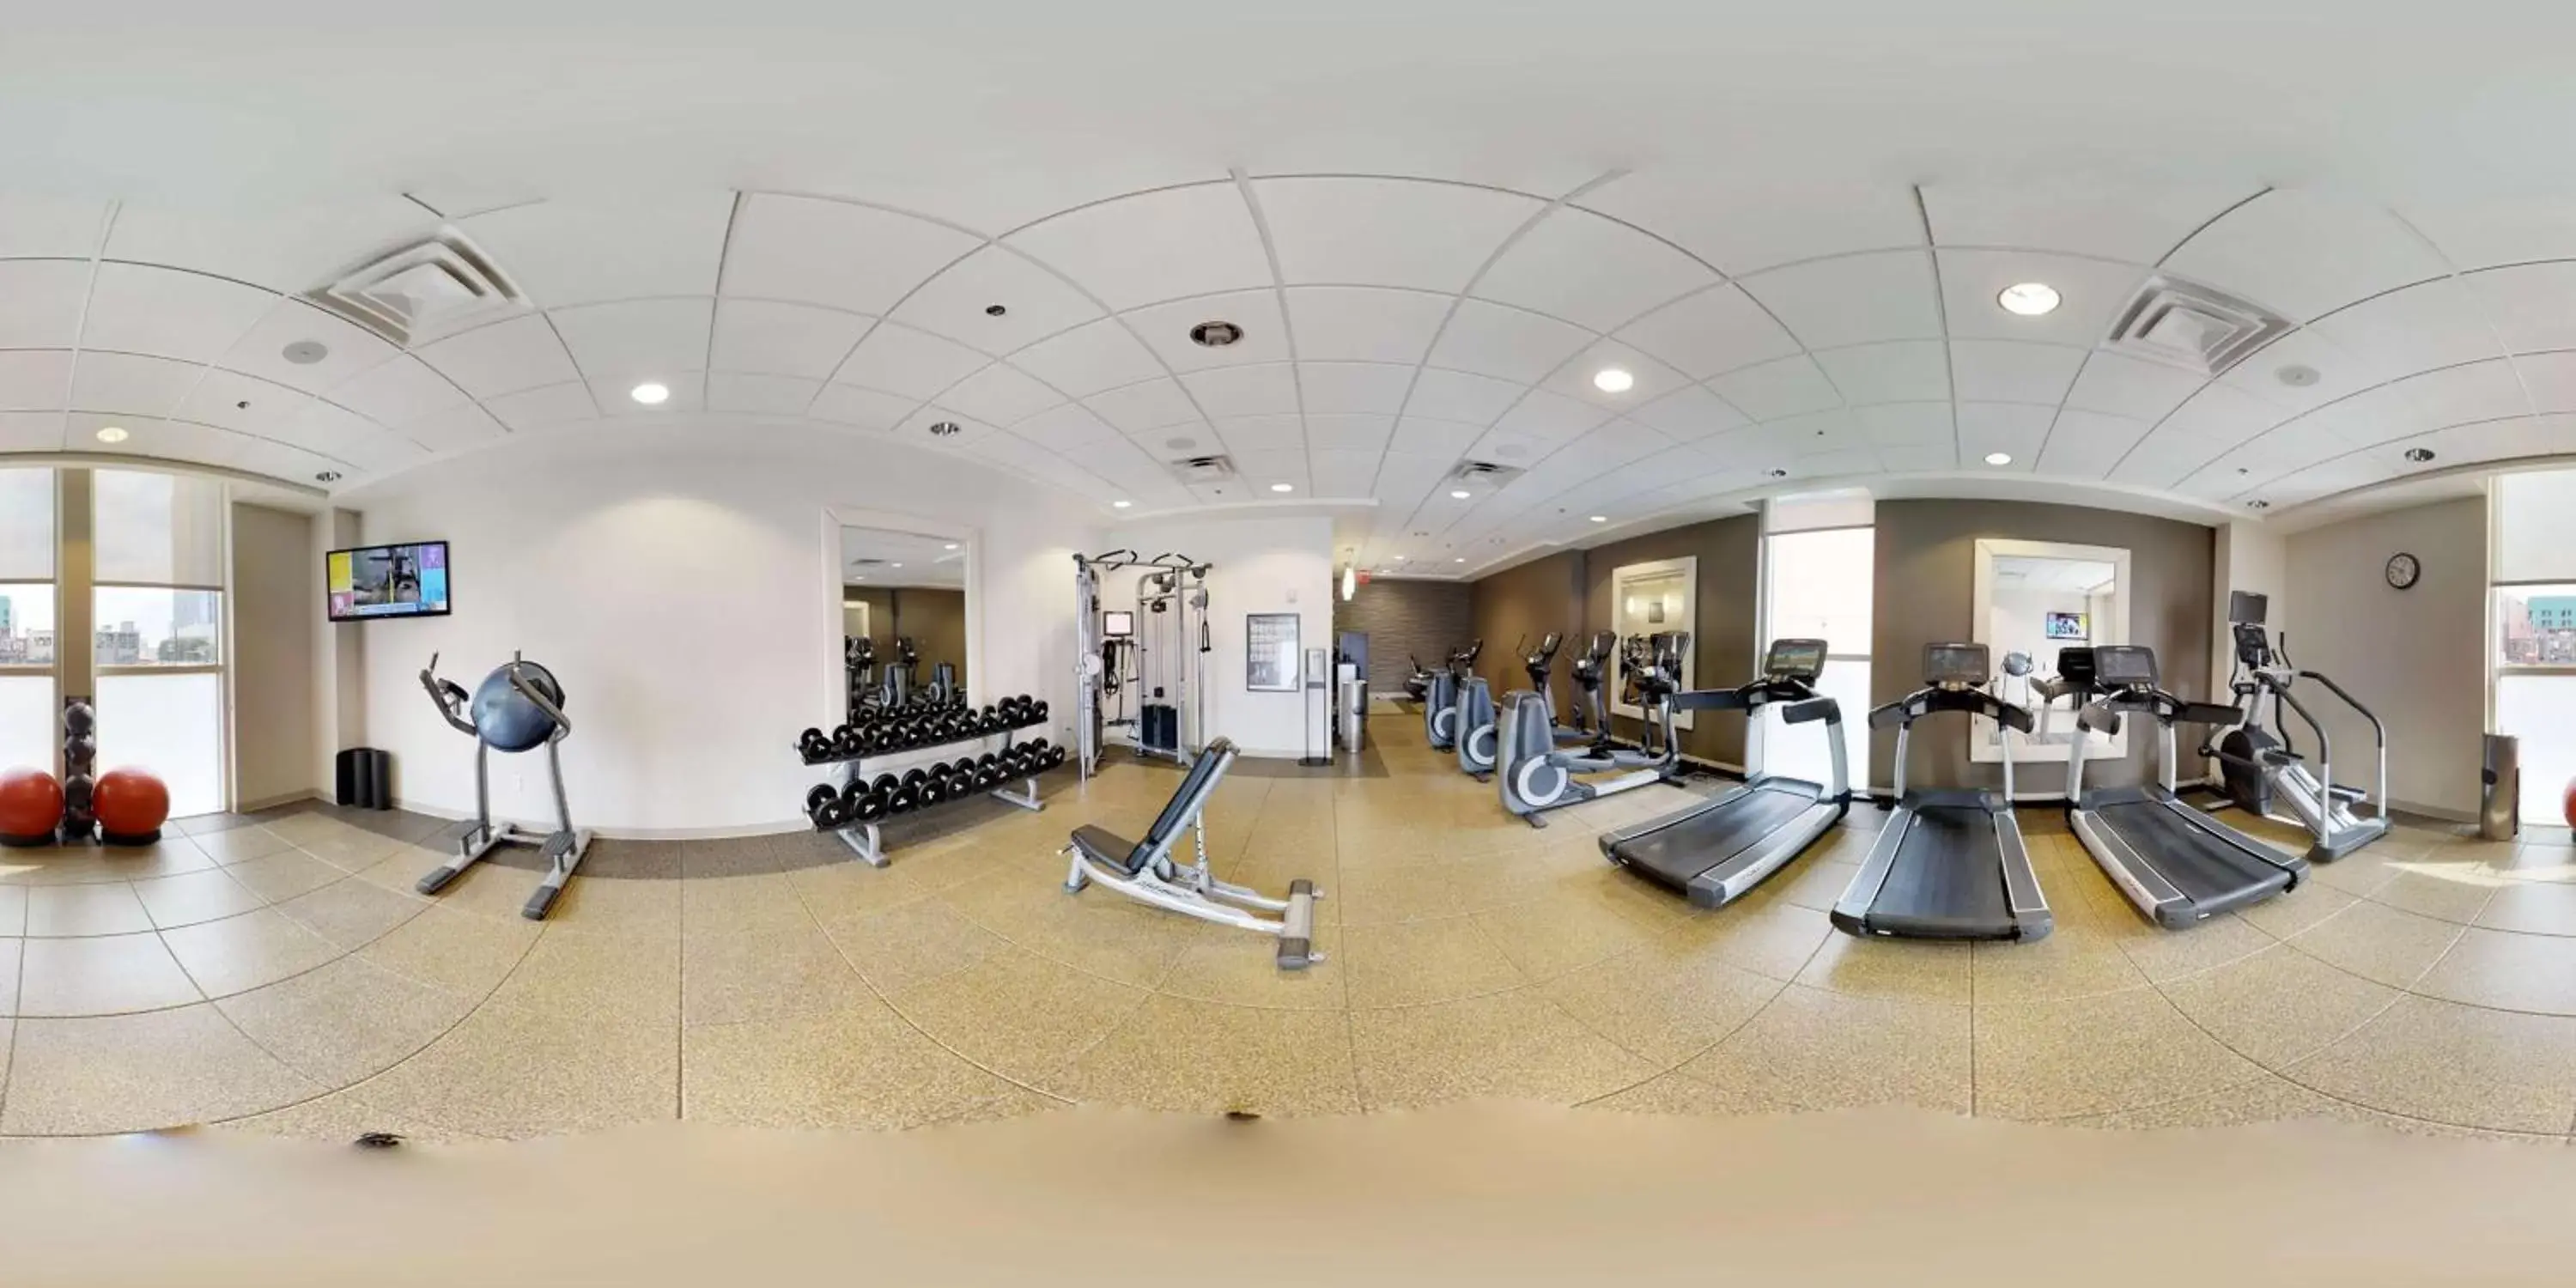 Fitness centre/facilities, Fitness Center/Facilities in Hilton Nashville Downtown